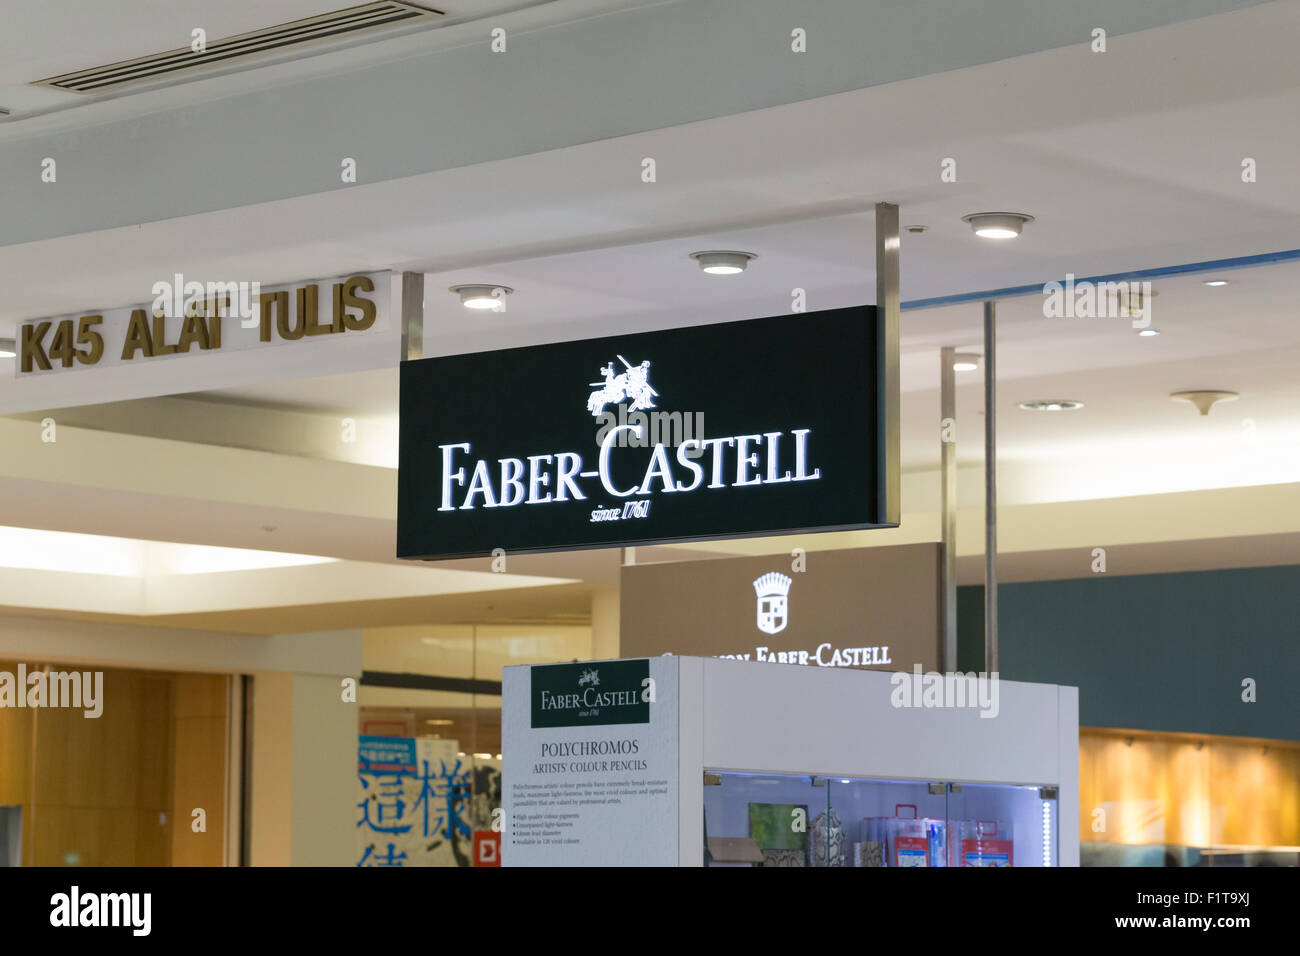 Faber Castell shop Stock Photo